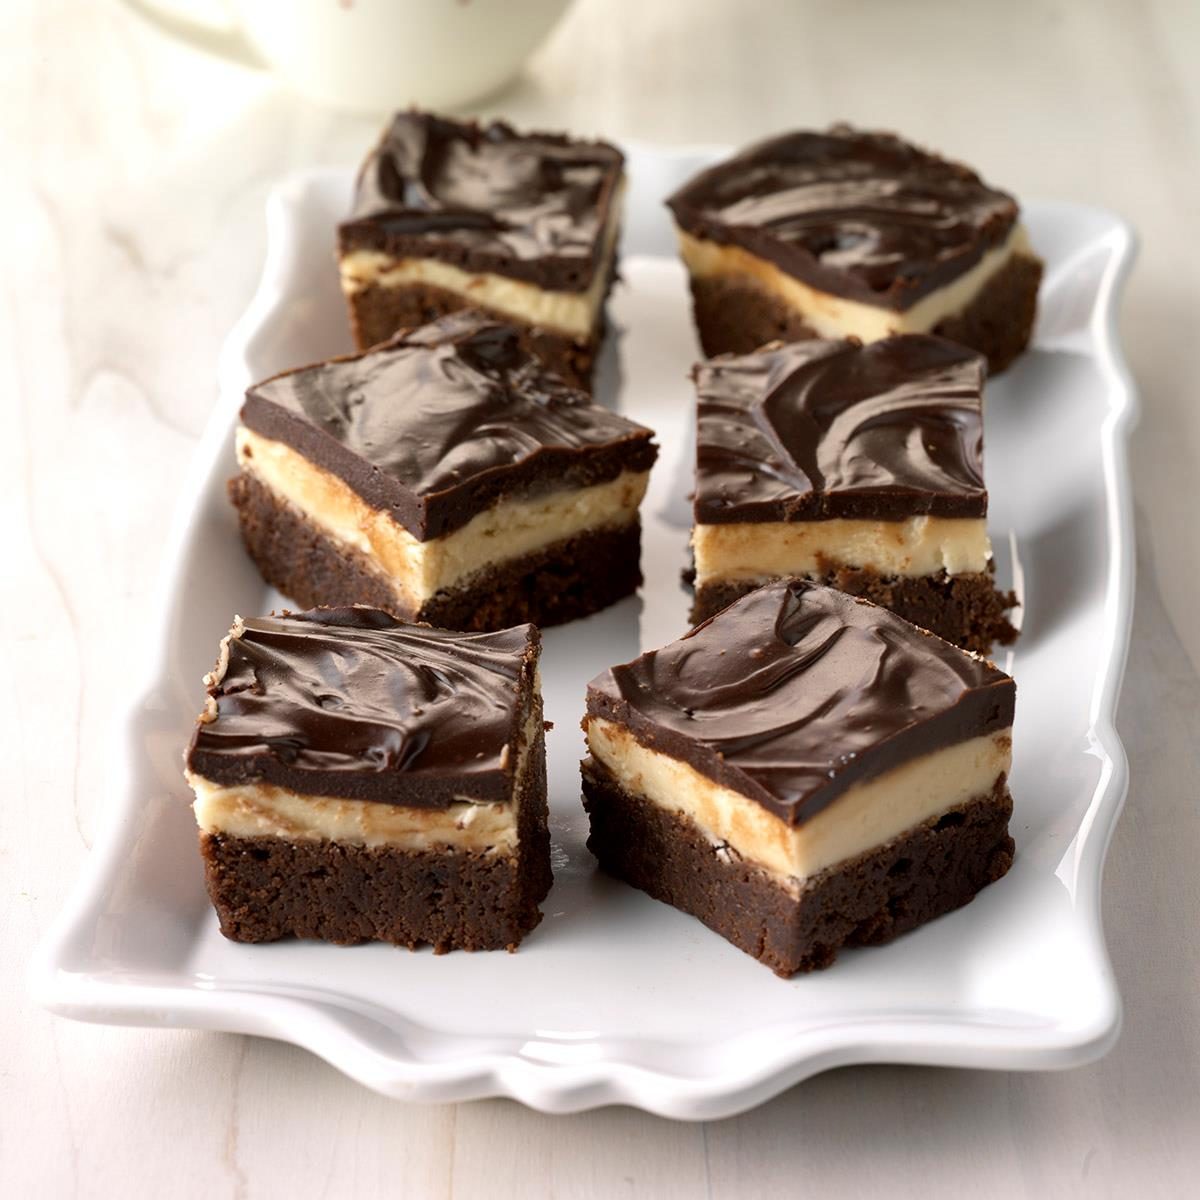 <p>My husband and I are big fans of Irish cream, so I wanted to incorporate it into a brownie. I started with my mom's brownie recipe, then added frosting and ganache. This decadent recipe is the result, and we really enjoy them! —Sue Gronholz, Beaver Dam, Wisconsin</p> <div class="listicle-page__buttons"> <div class="listicle-page__cta-button"><a href='https://www.tasteofhome.com/recipes/fudgy-layered-irish-mocha-brownies/'>Go to Recipe</a></div> </div>